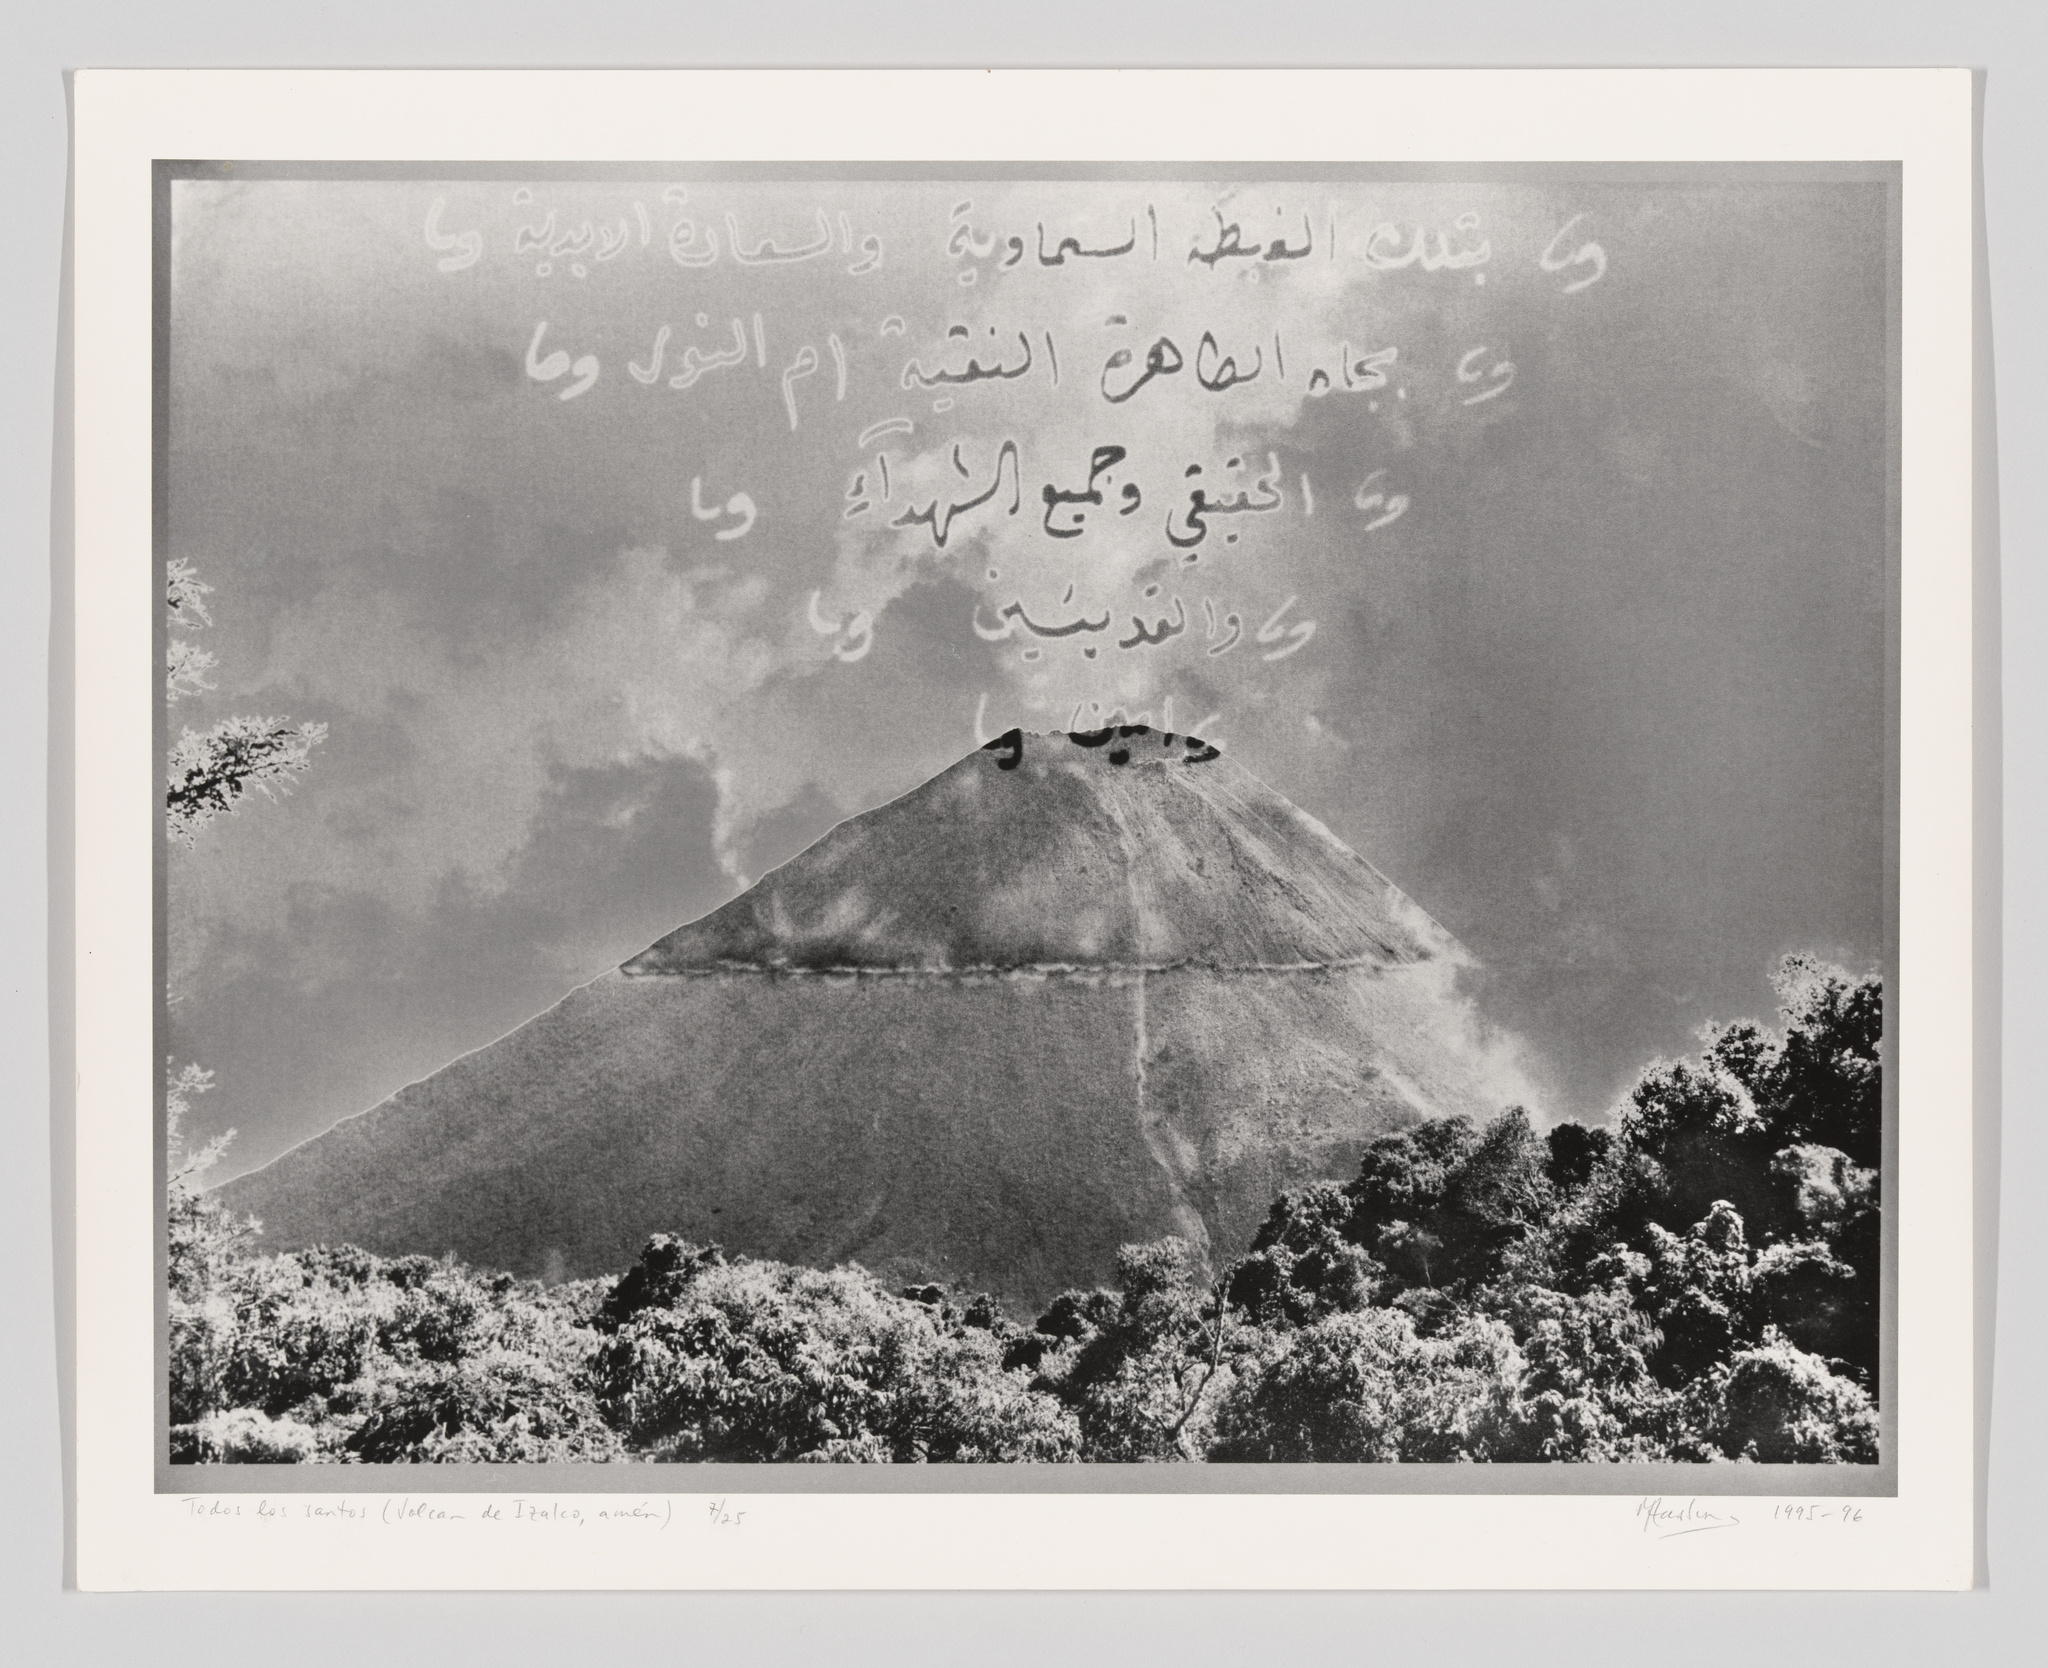 A black and white photo of a volcano from a distance with Arabic writing superimposed across the top.